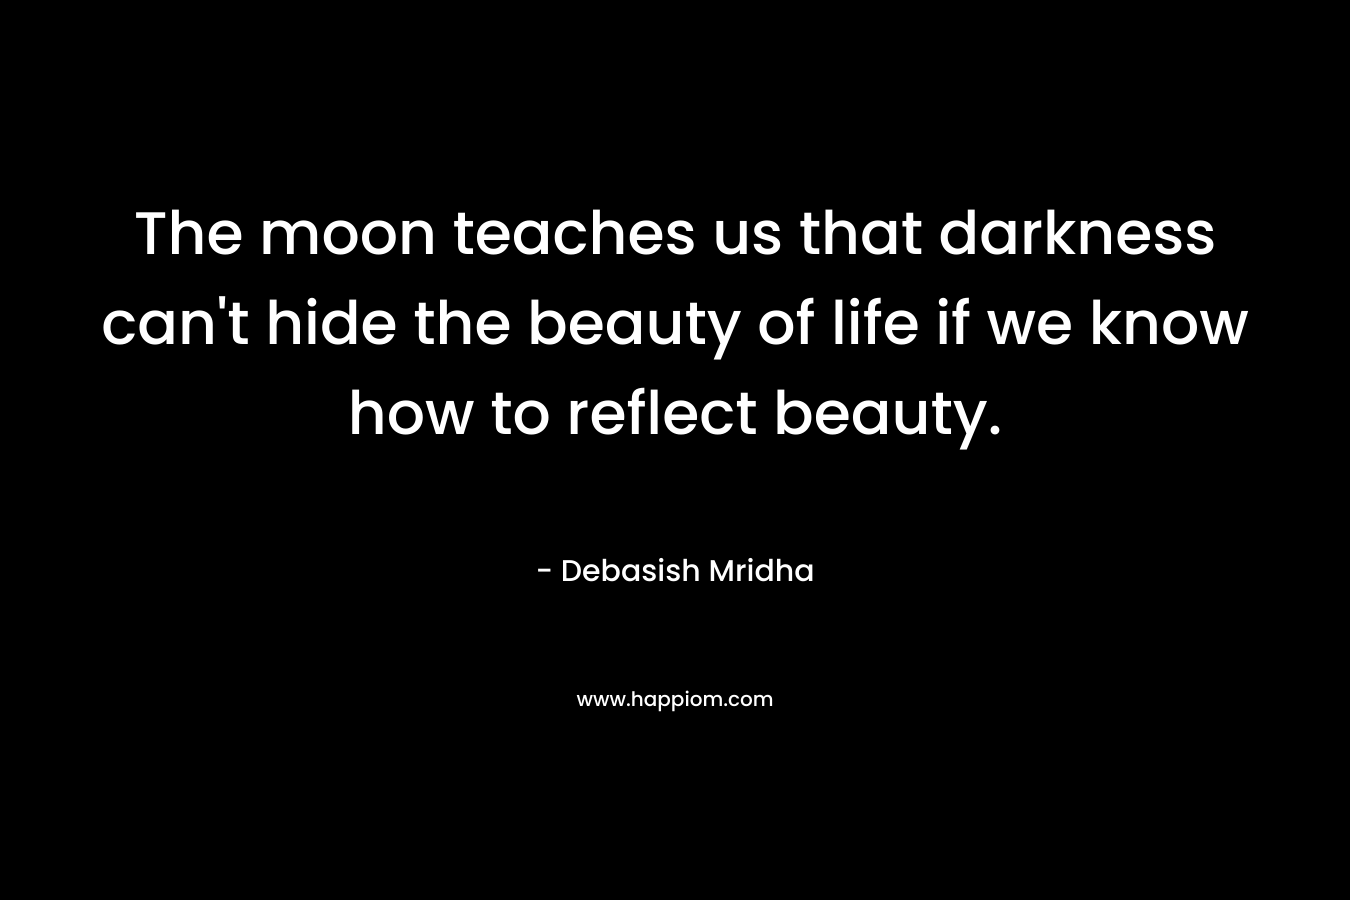 The moon teaches us that darkness can't hide the beauty of life if we know how to reflect beauty.